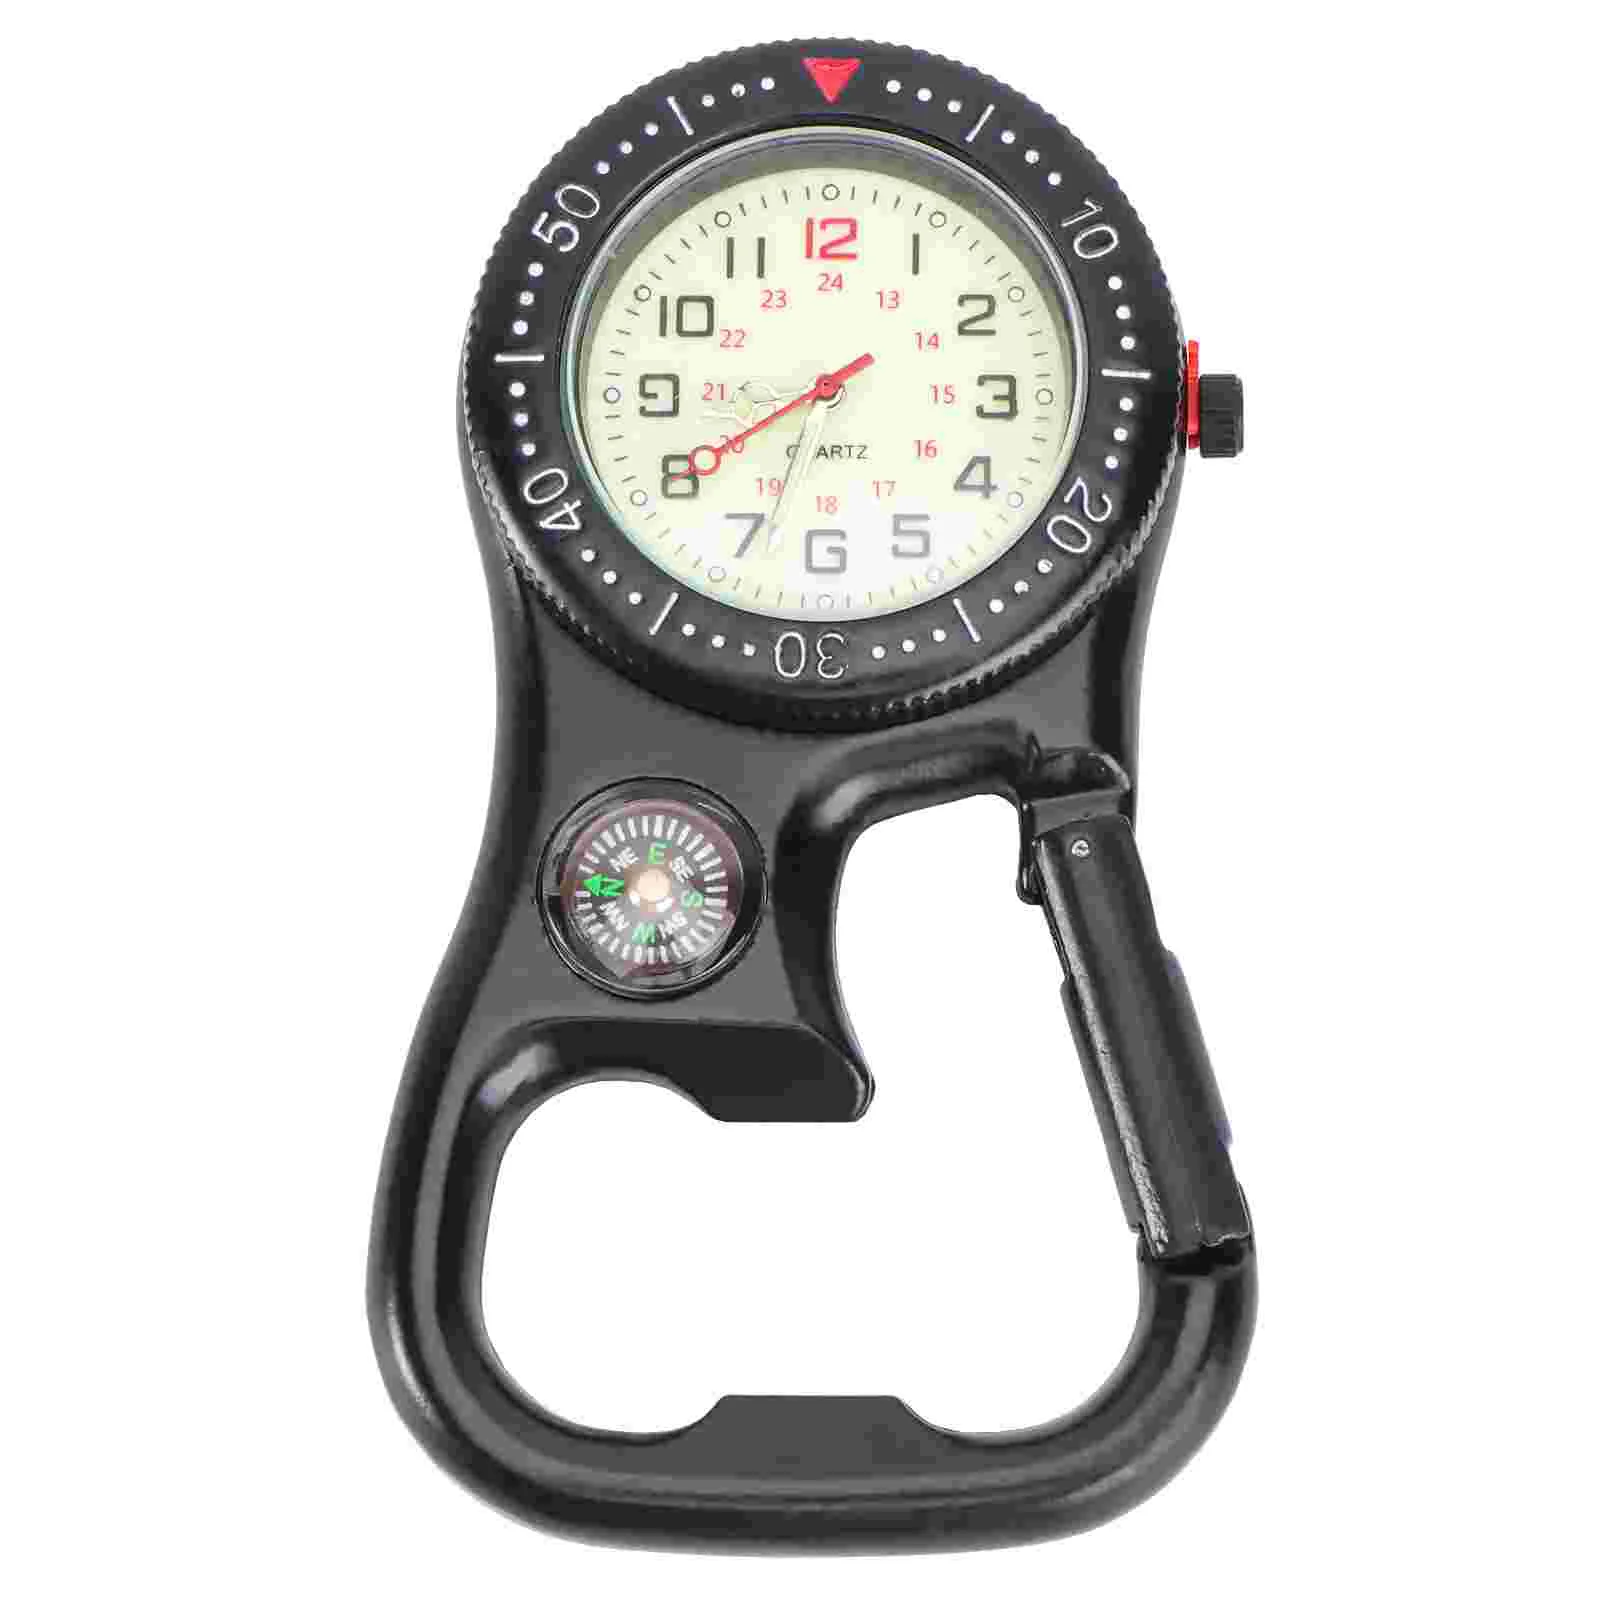 

Clip-On Carabiner Luminous Face Backpacker FOB Watch With Compass Bottle Opener For Mountaineering Sports Equipment Black